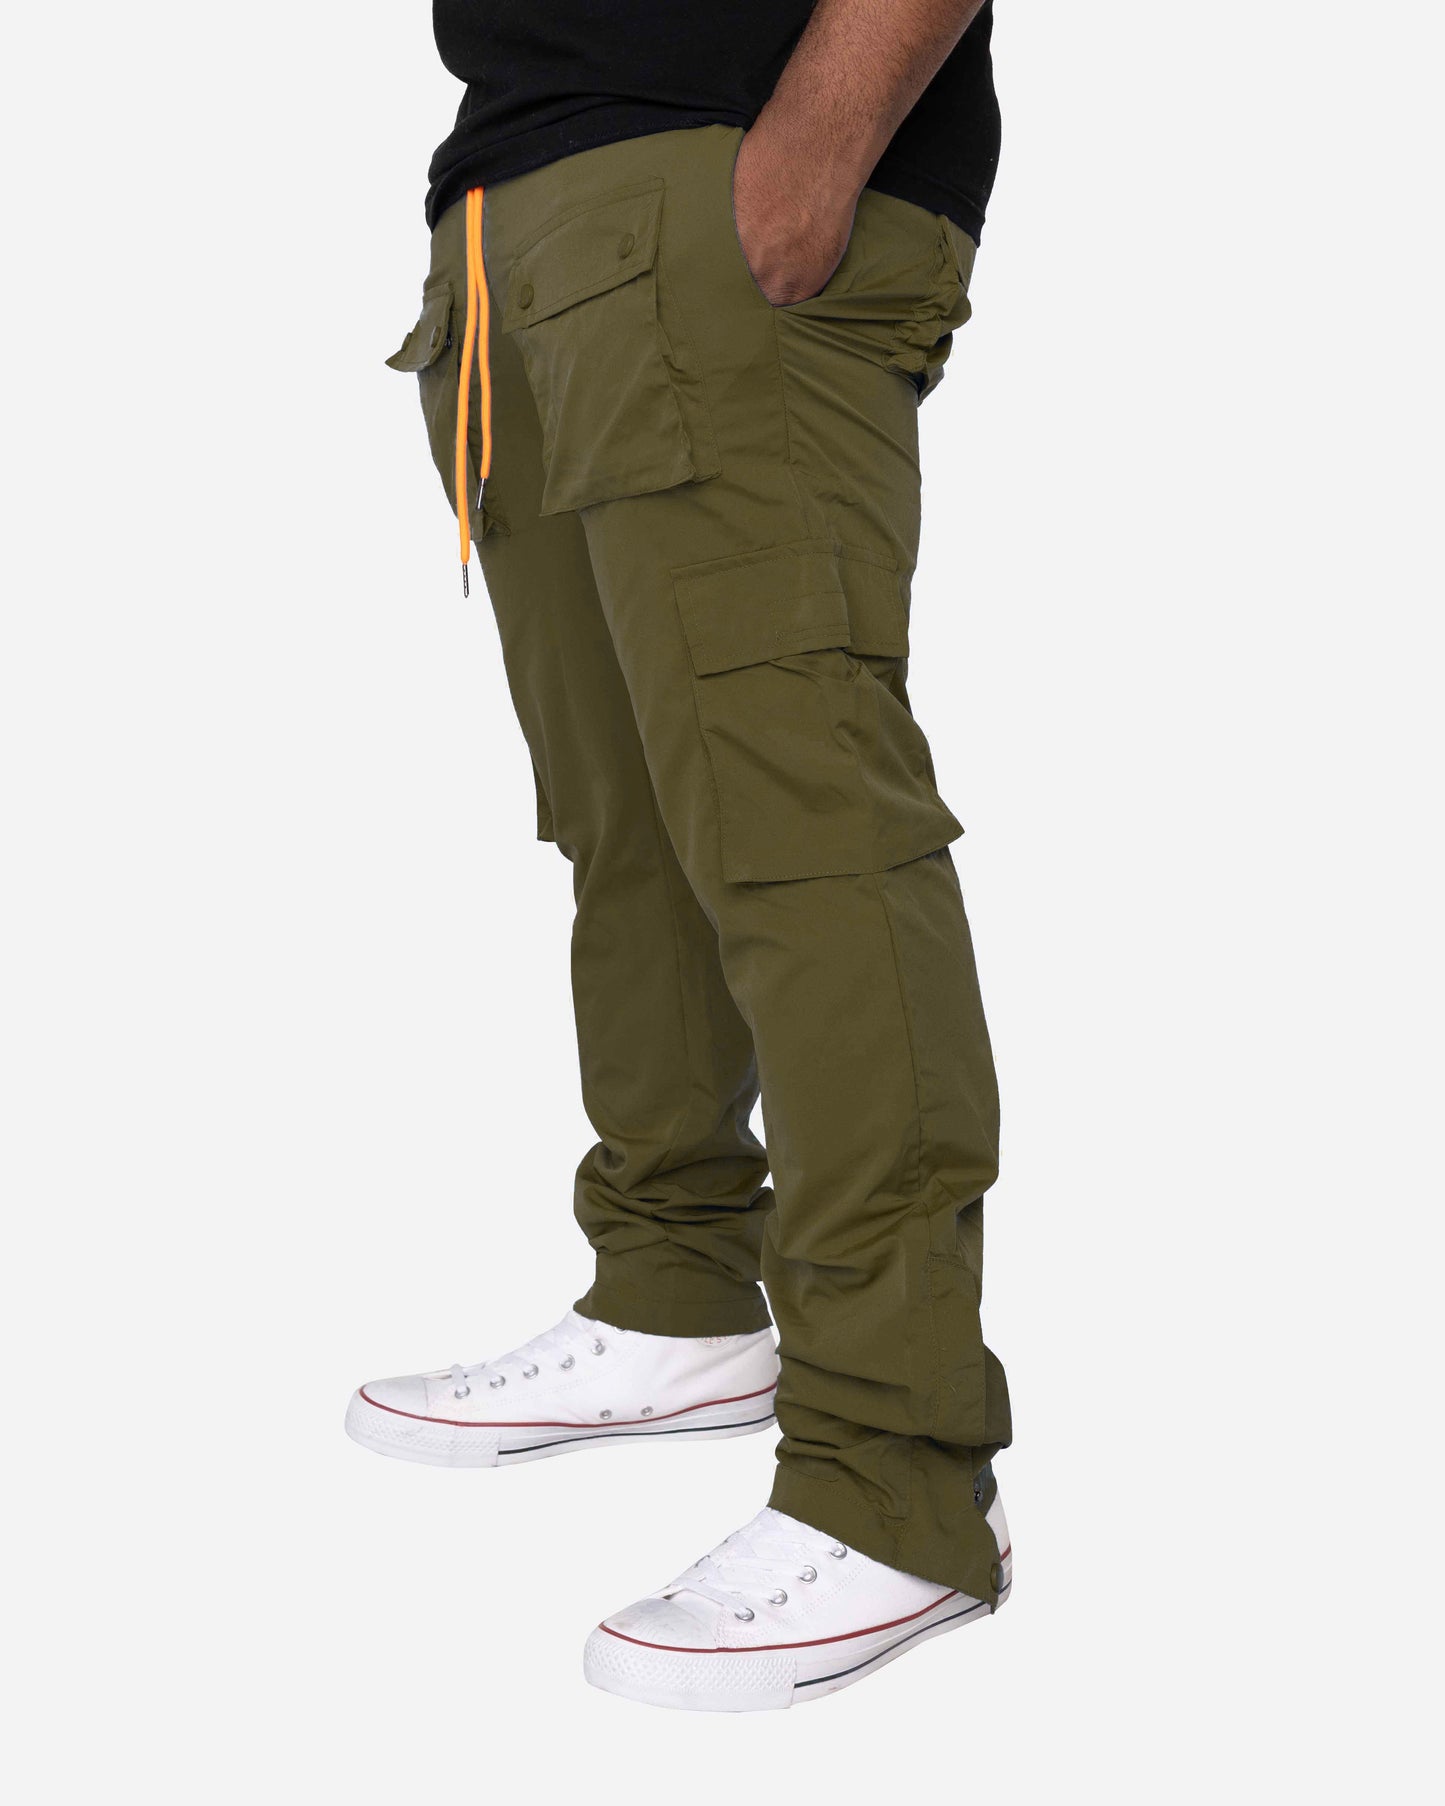 EPTM BIG N TALL SNAP CARGO PANTS-OLIVE